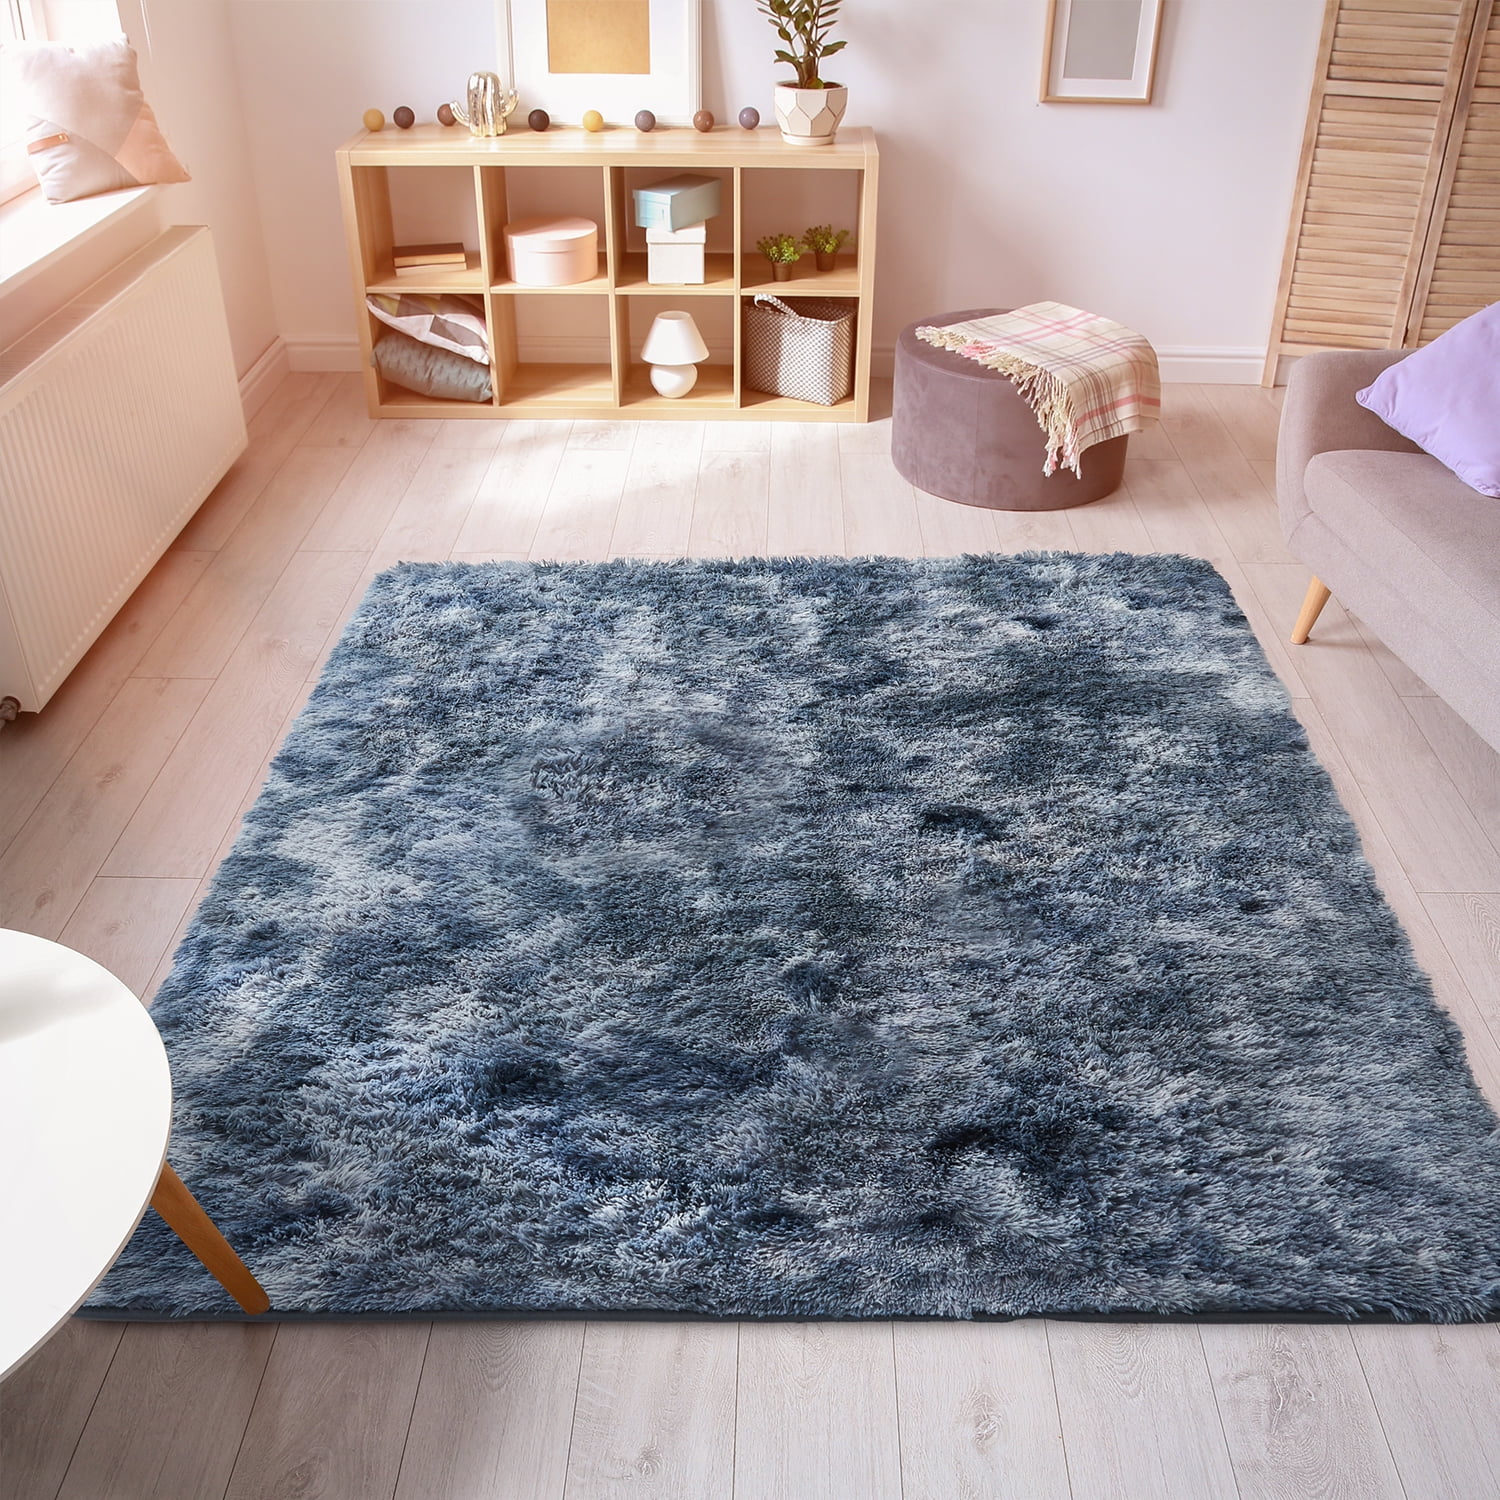 SALE Extra Thick Pearl Duck Egg Blue Shaggy Rug in various sizes 